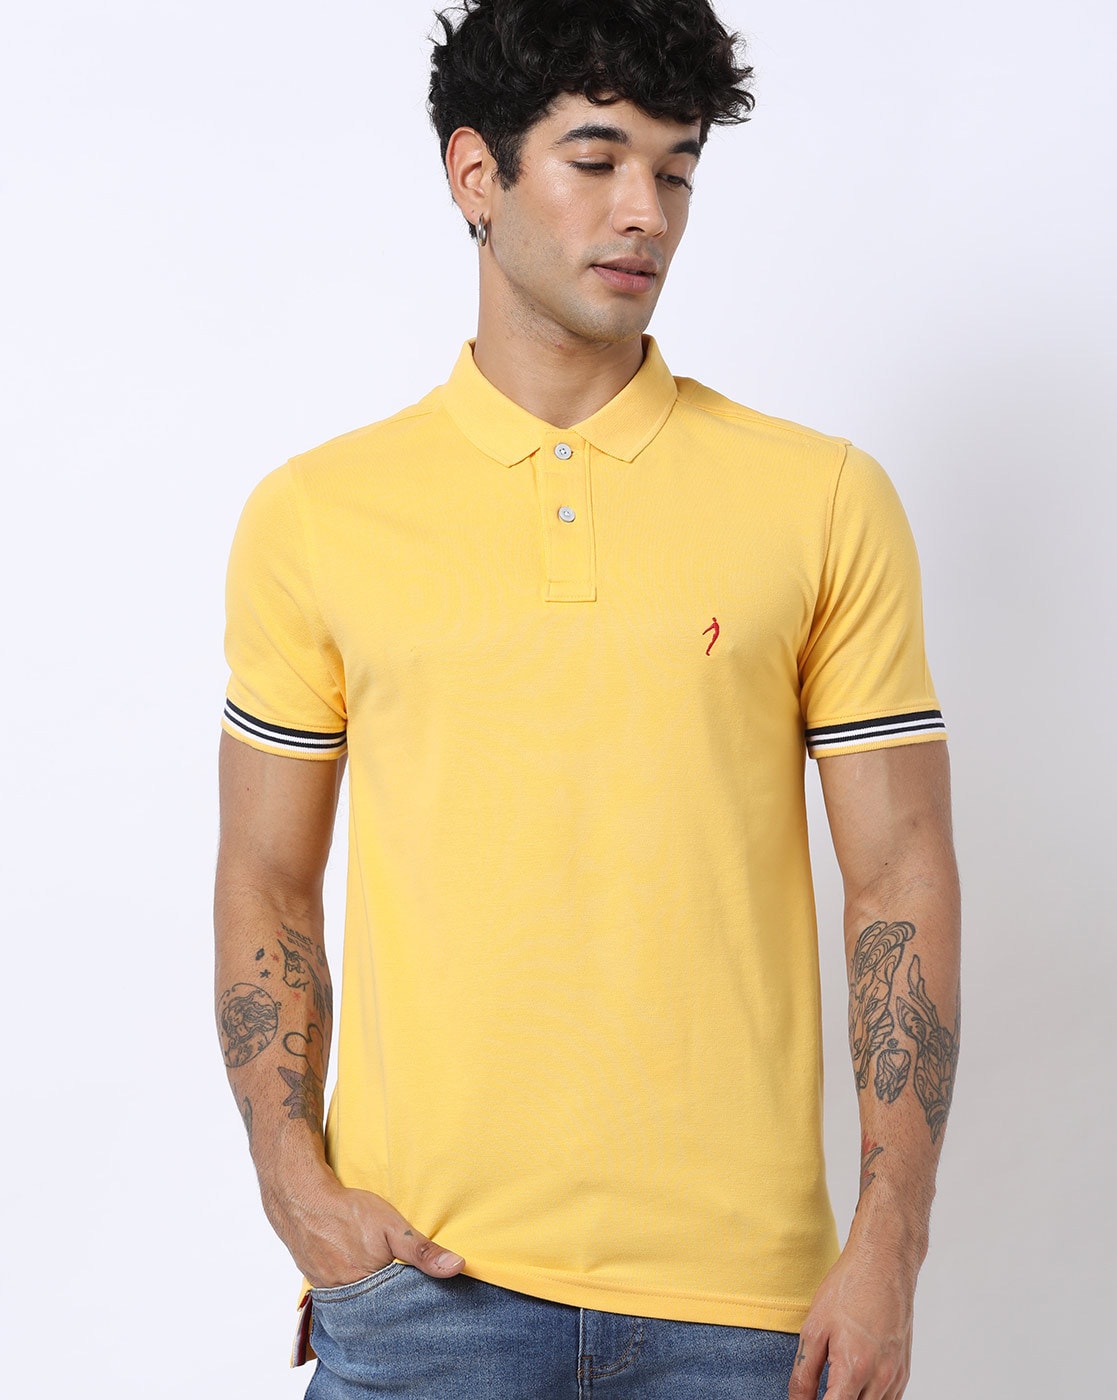 indian polo t shirt